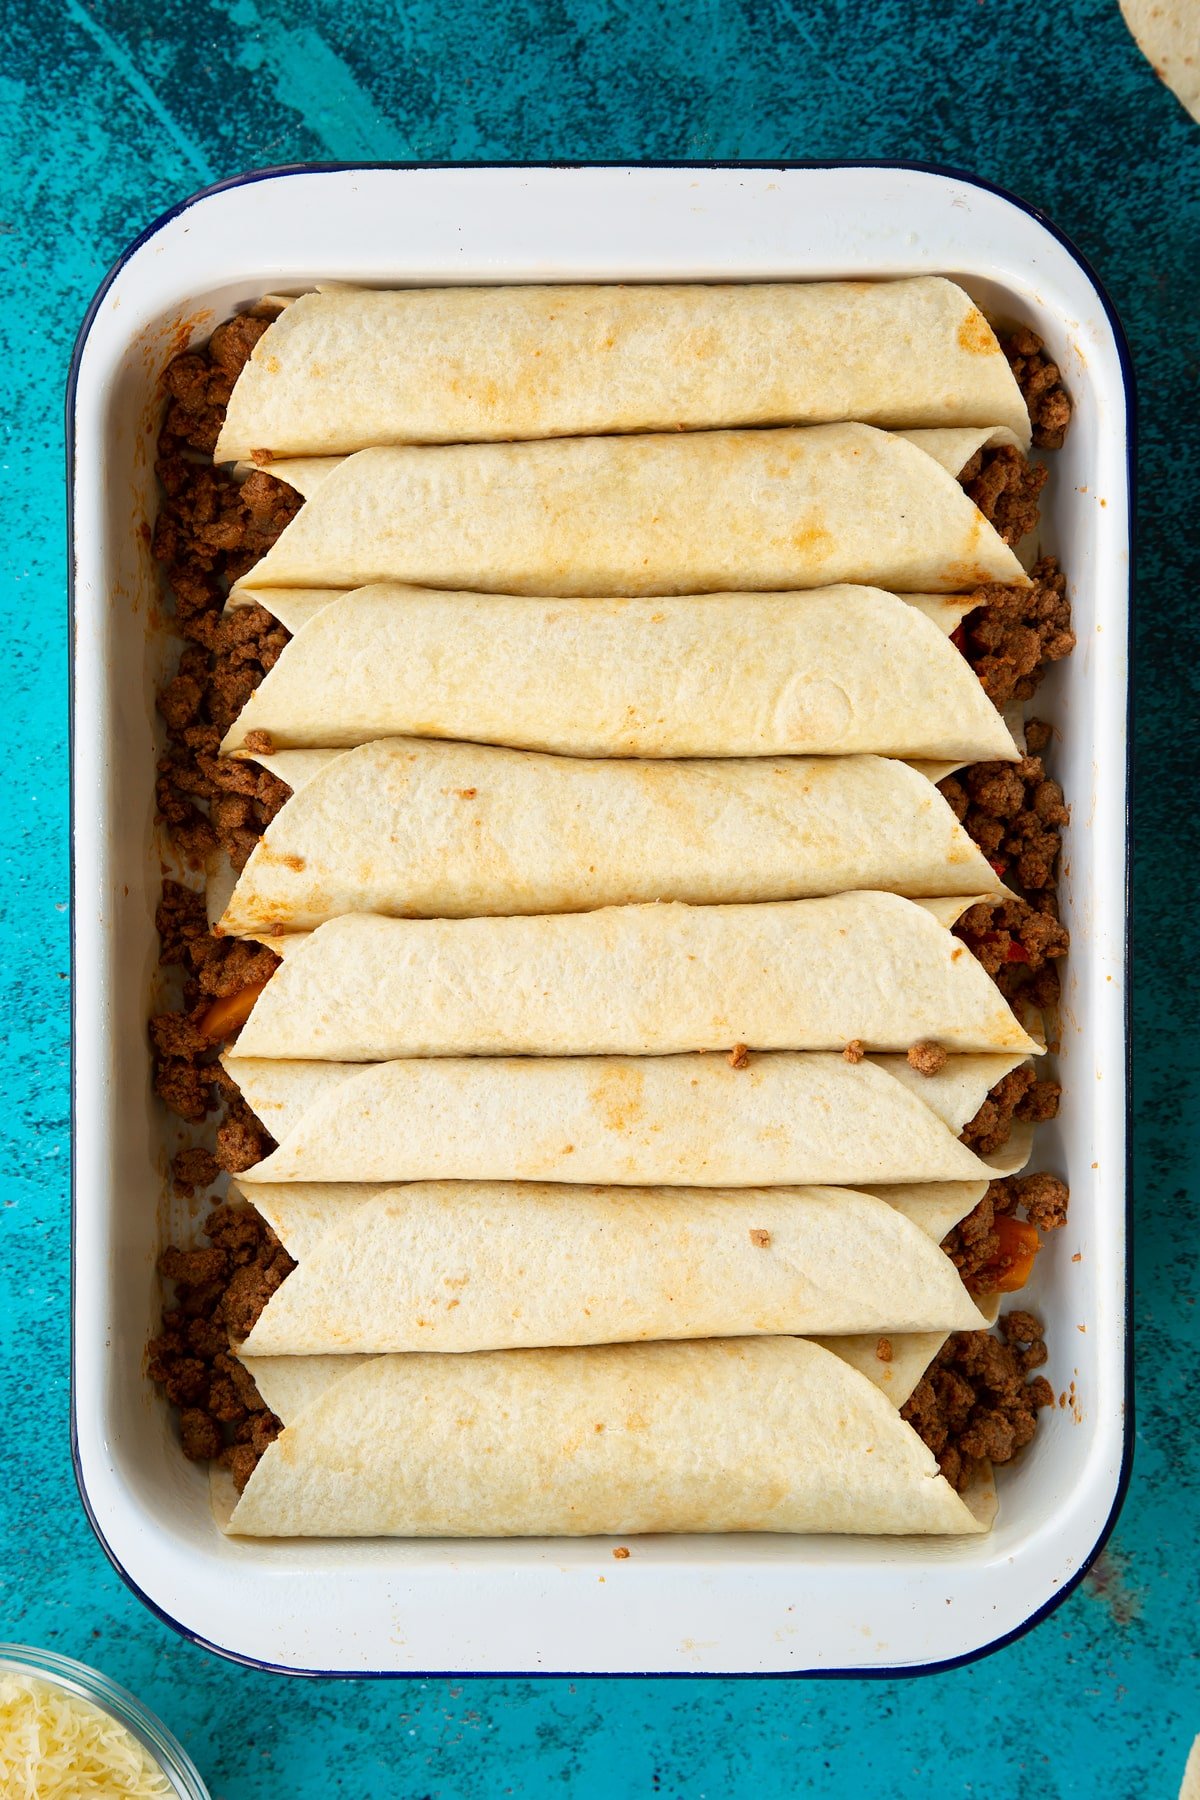 A tray of tortillas filled with Quorn mince enchilada filling.